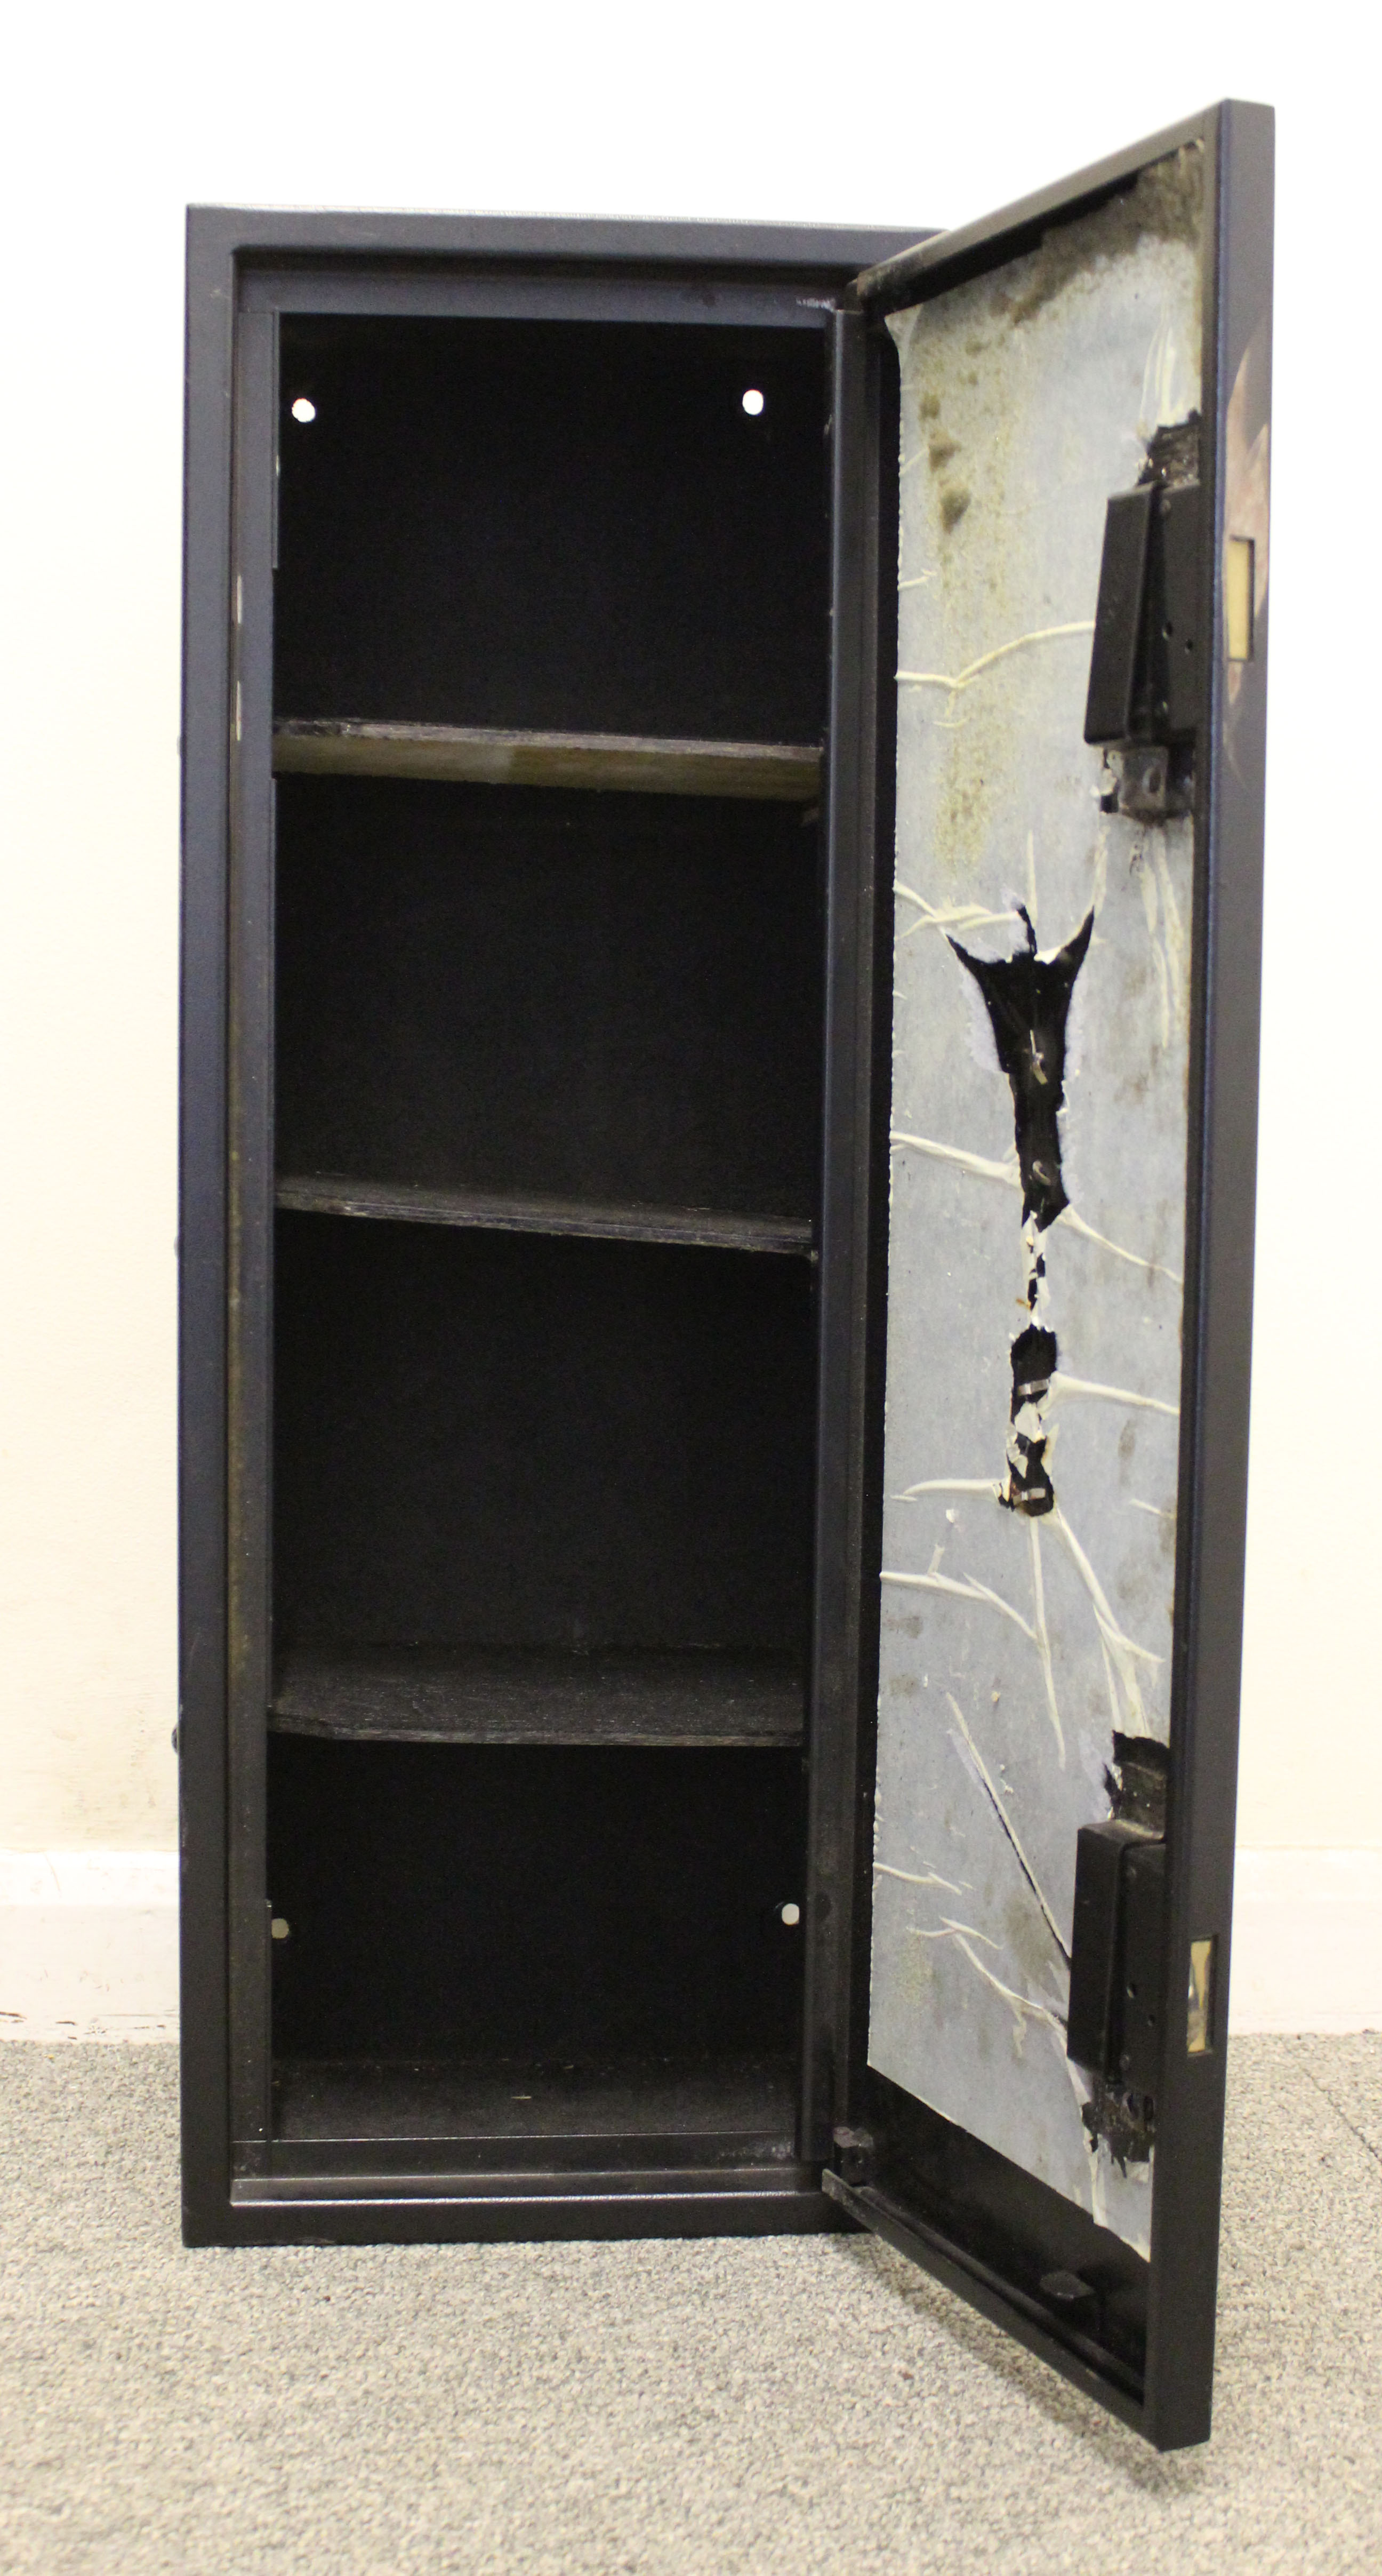 Steel security cabinet, h.32 ins x w.11¾ ins x d.8 ins (locks a/f) - Image 2 of 2